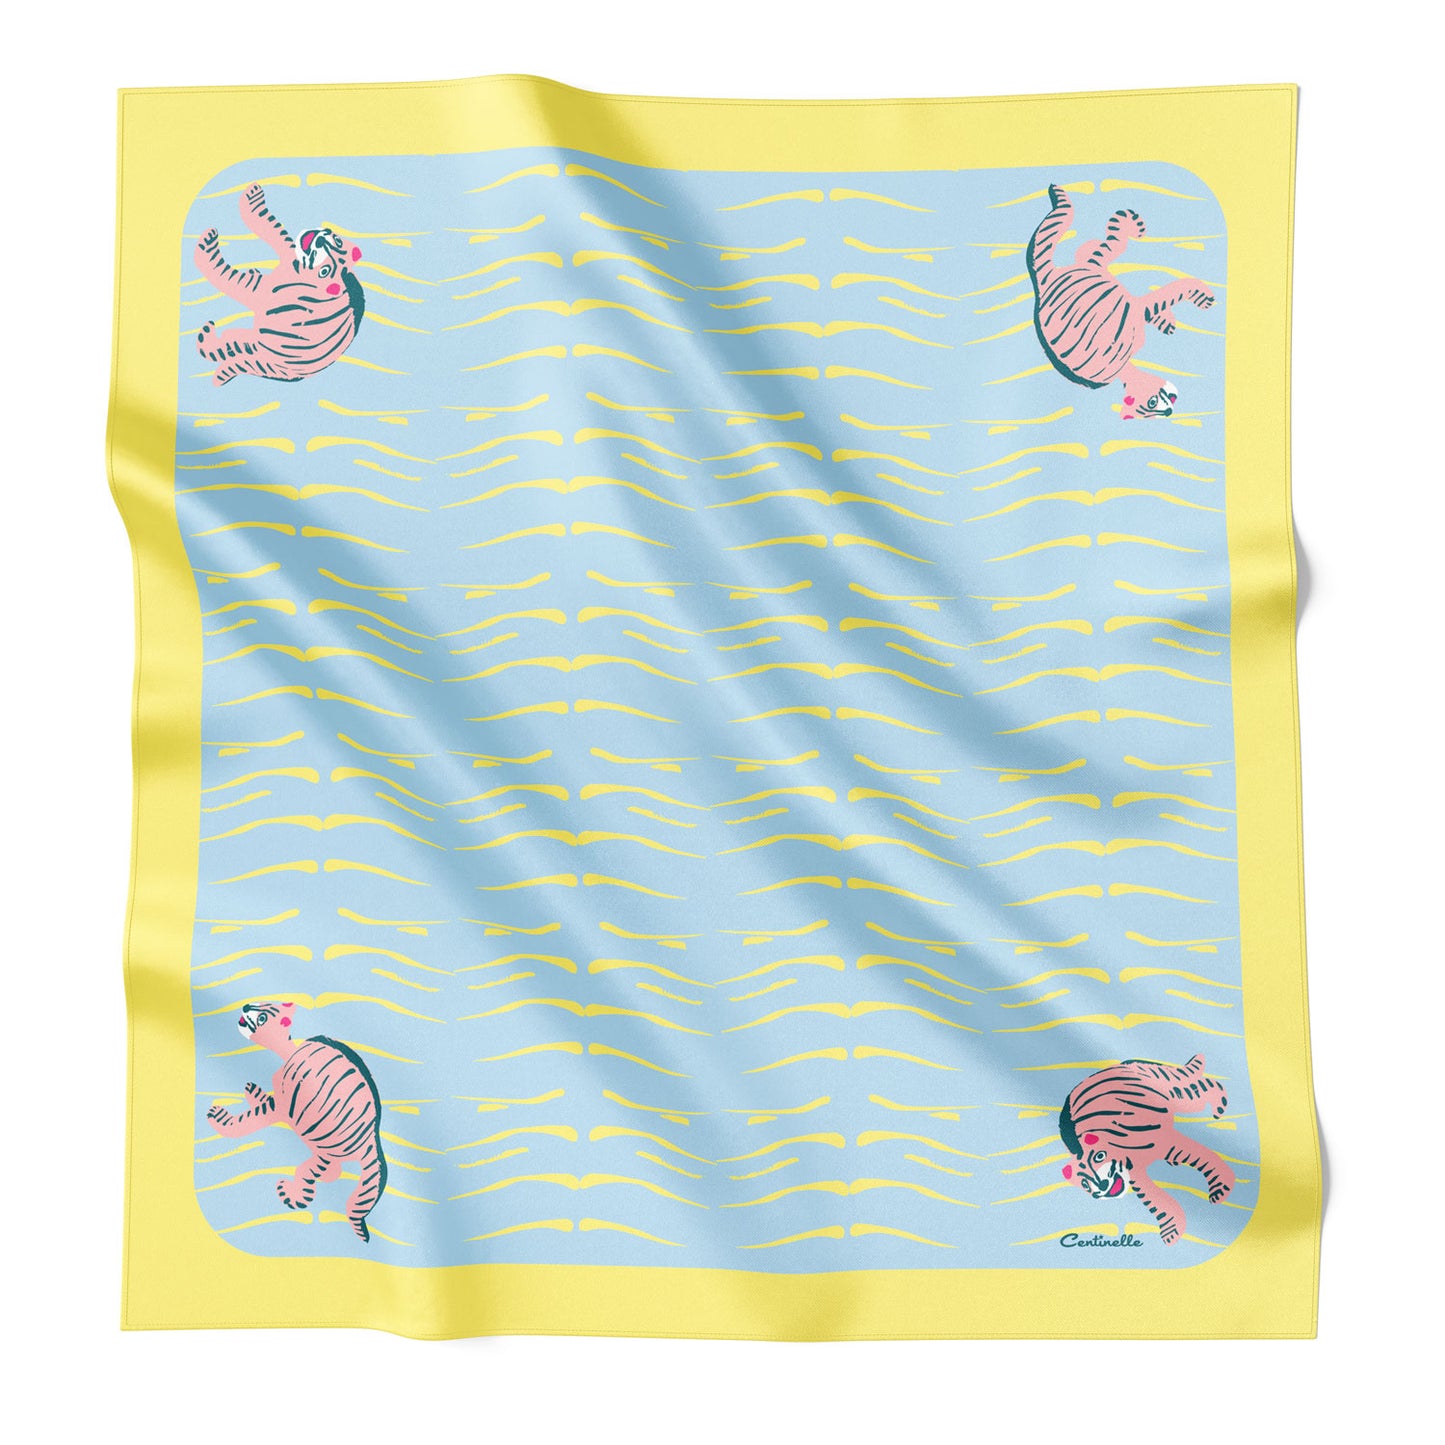 Pink tigers on a blue silk scarf with yellow border.